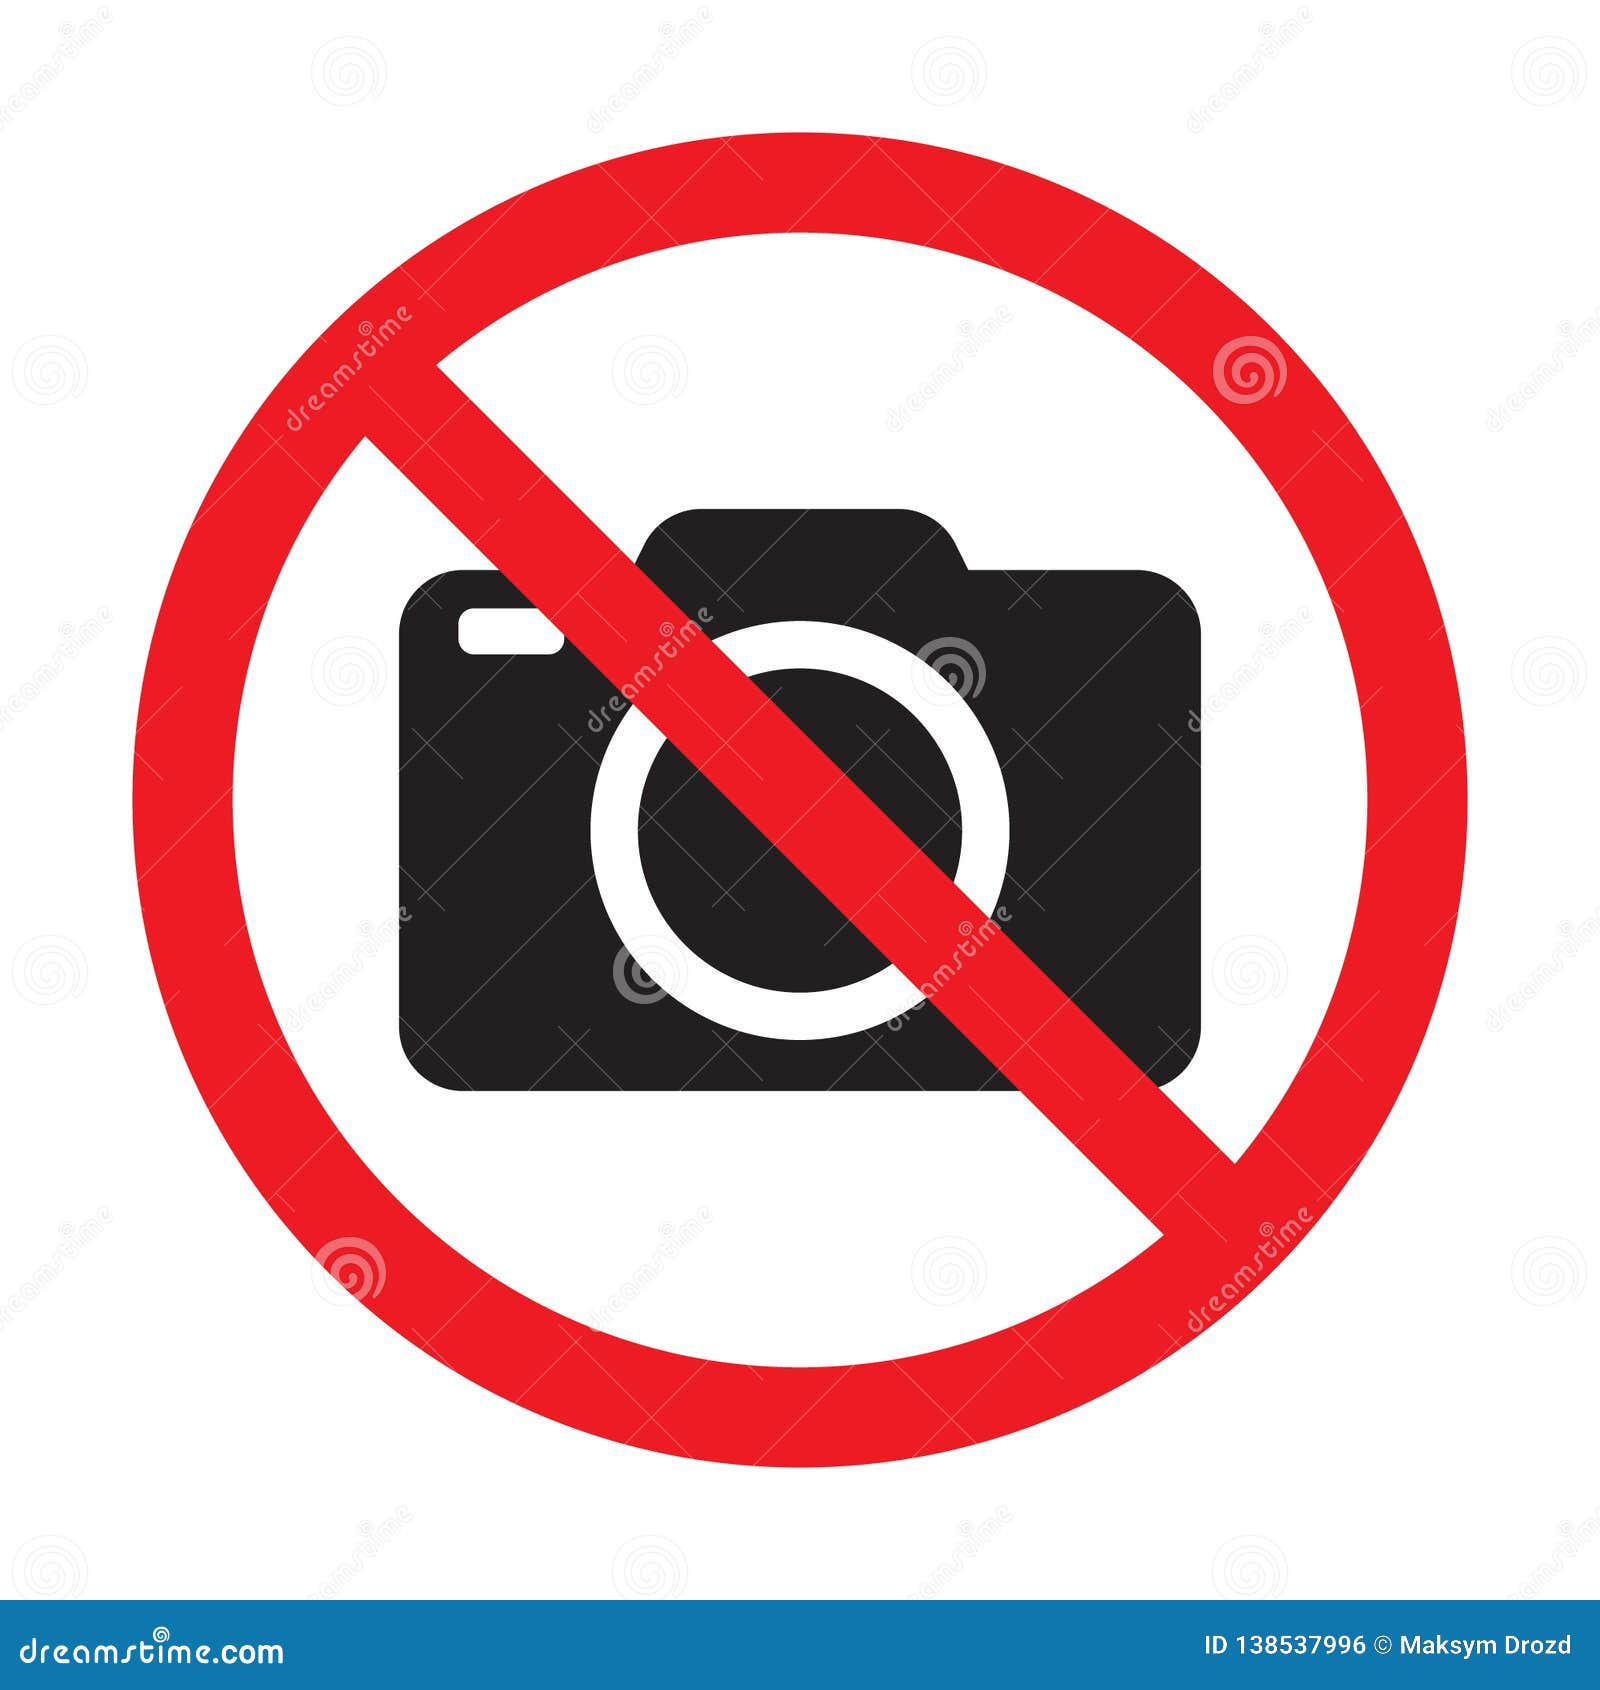 no cameras allowed sign. red prohibition no camera sign. no taking pictures, no photographs sign.